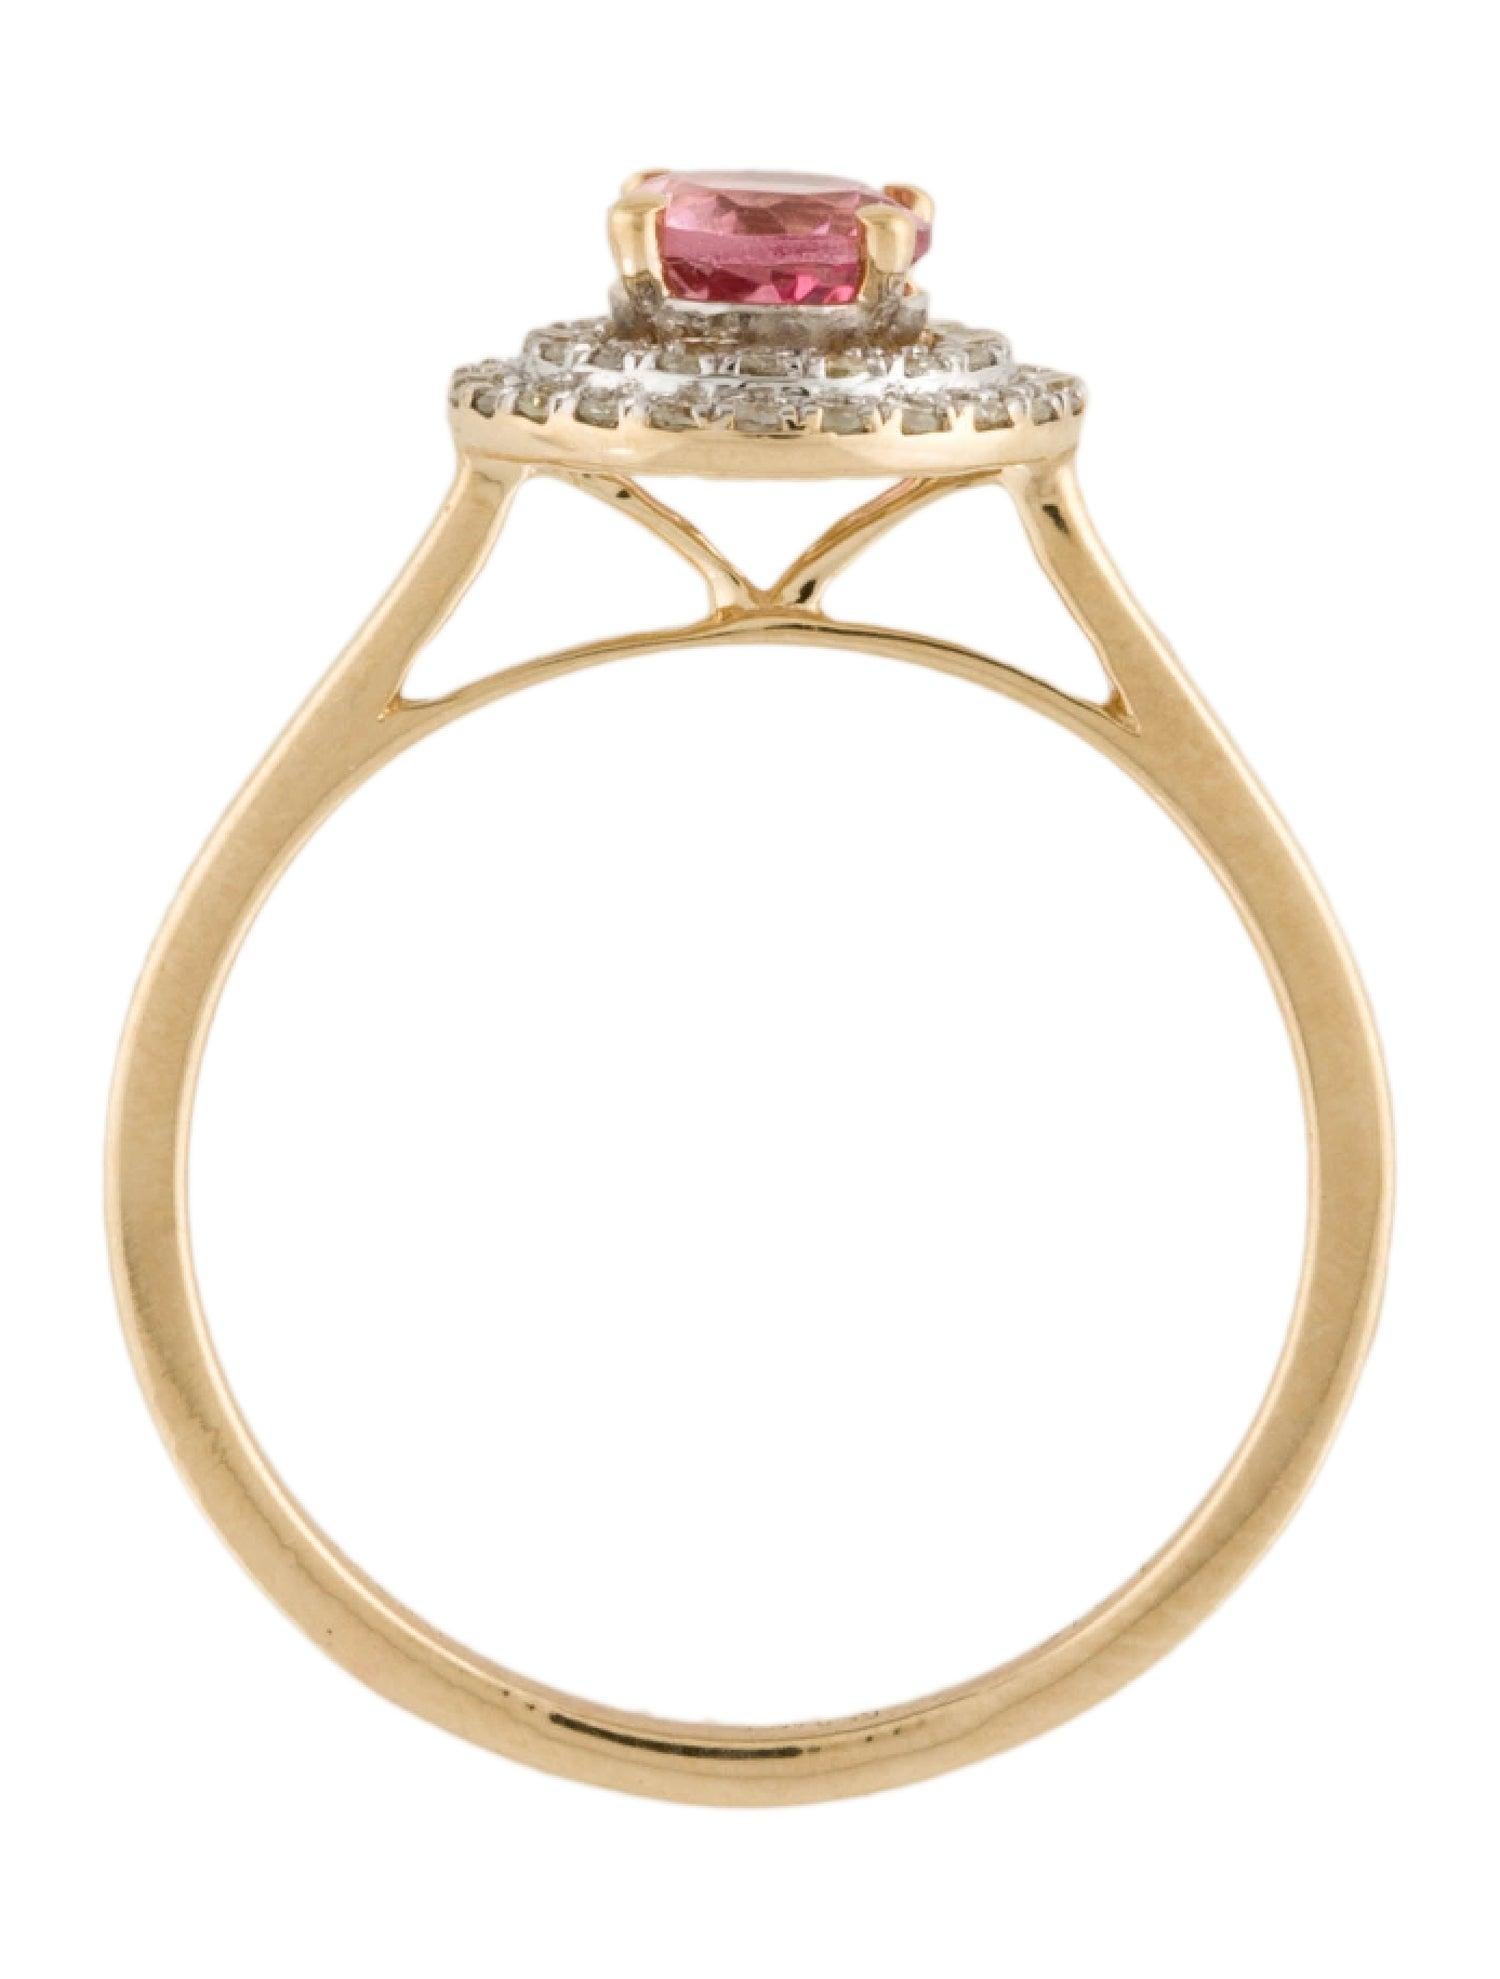 Elegant 14K Tourmaline & Diamond Cocktail Ring - Size 6.25  Timeless Luxury In New Condition For Sale In Holtsville, NY